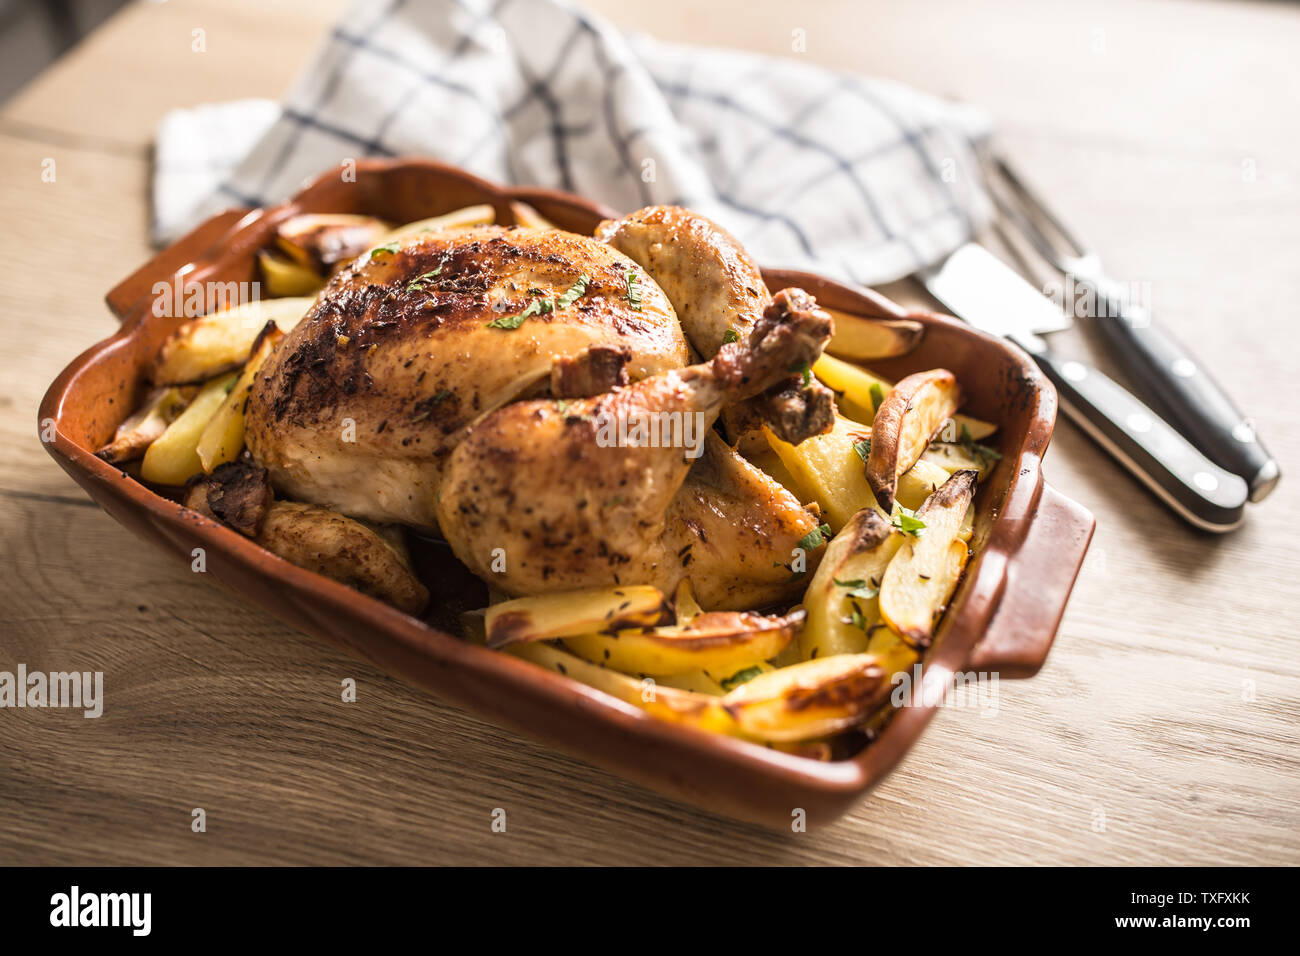 Roasted whole chicken with potatoes in baking dish. Tasty food a Stock Photo